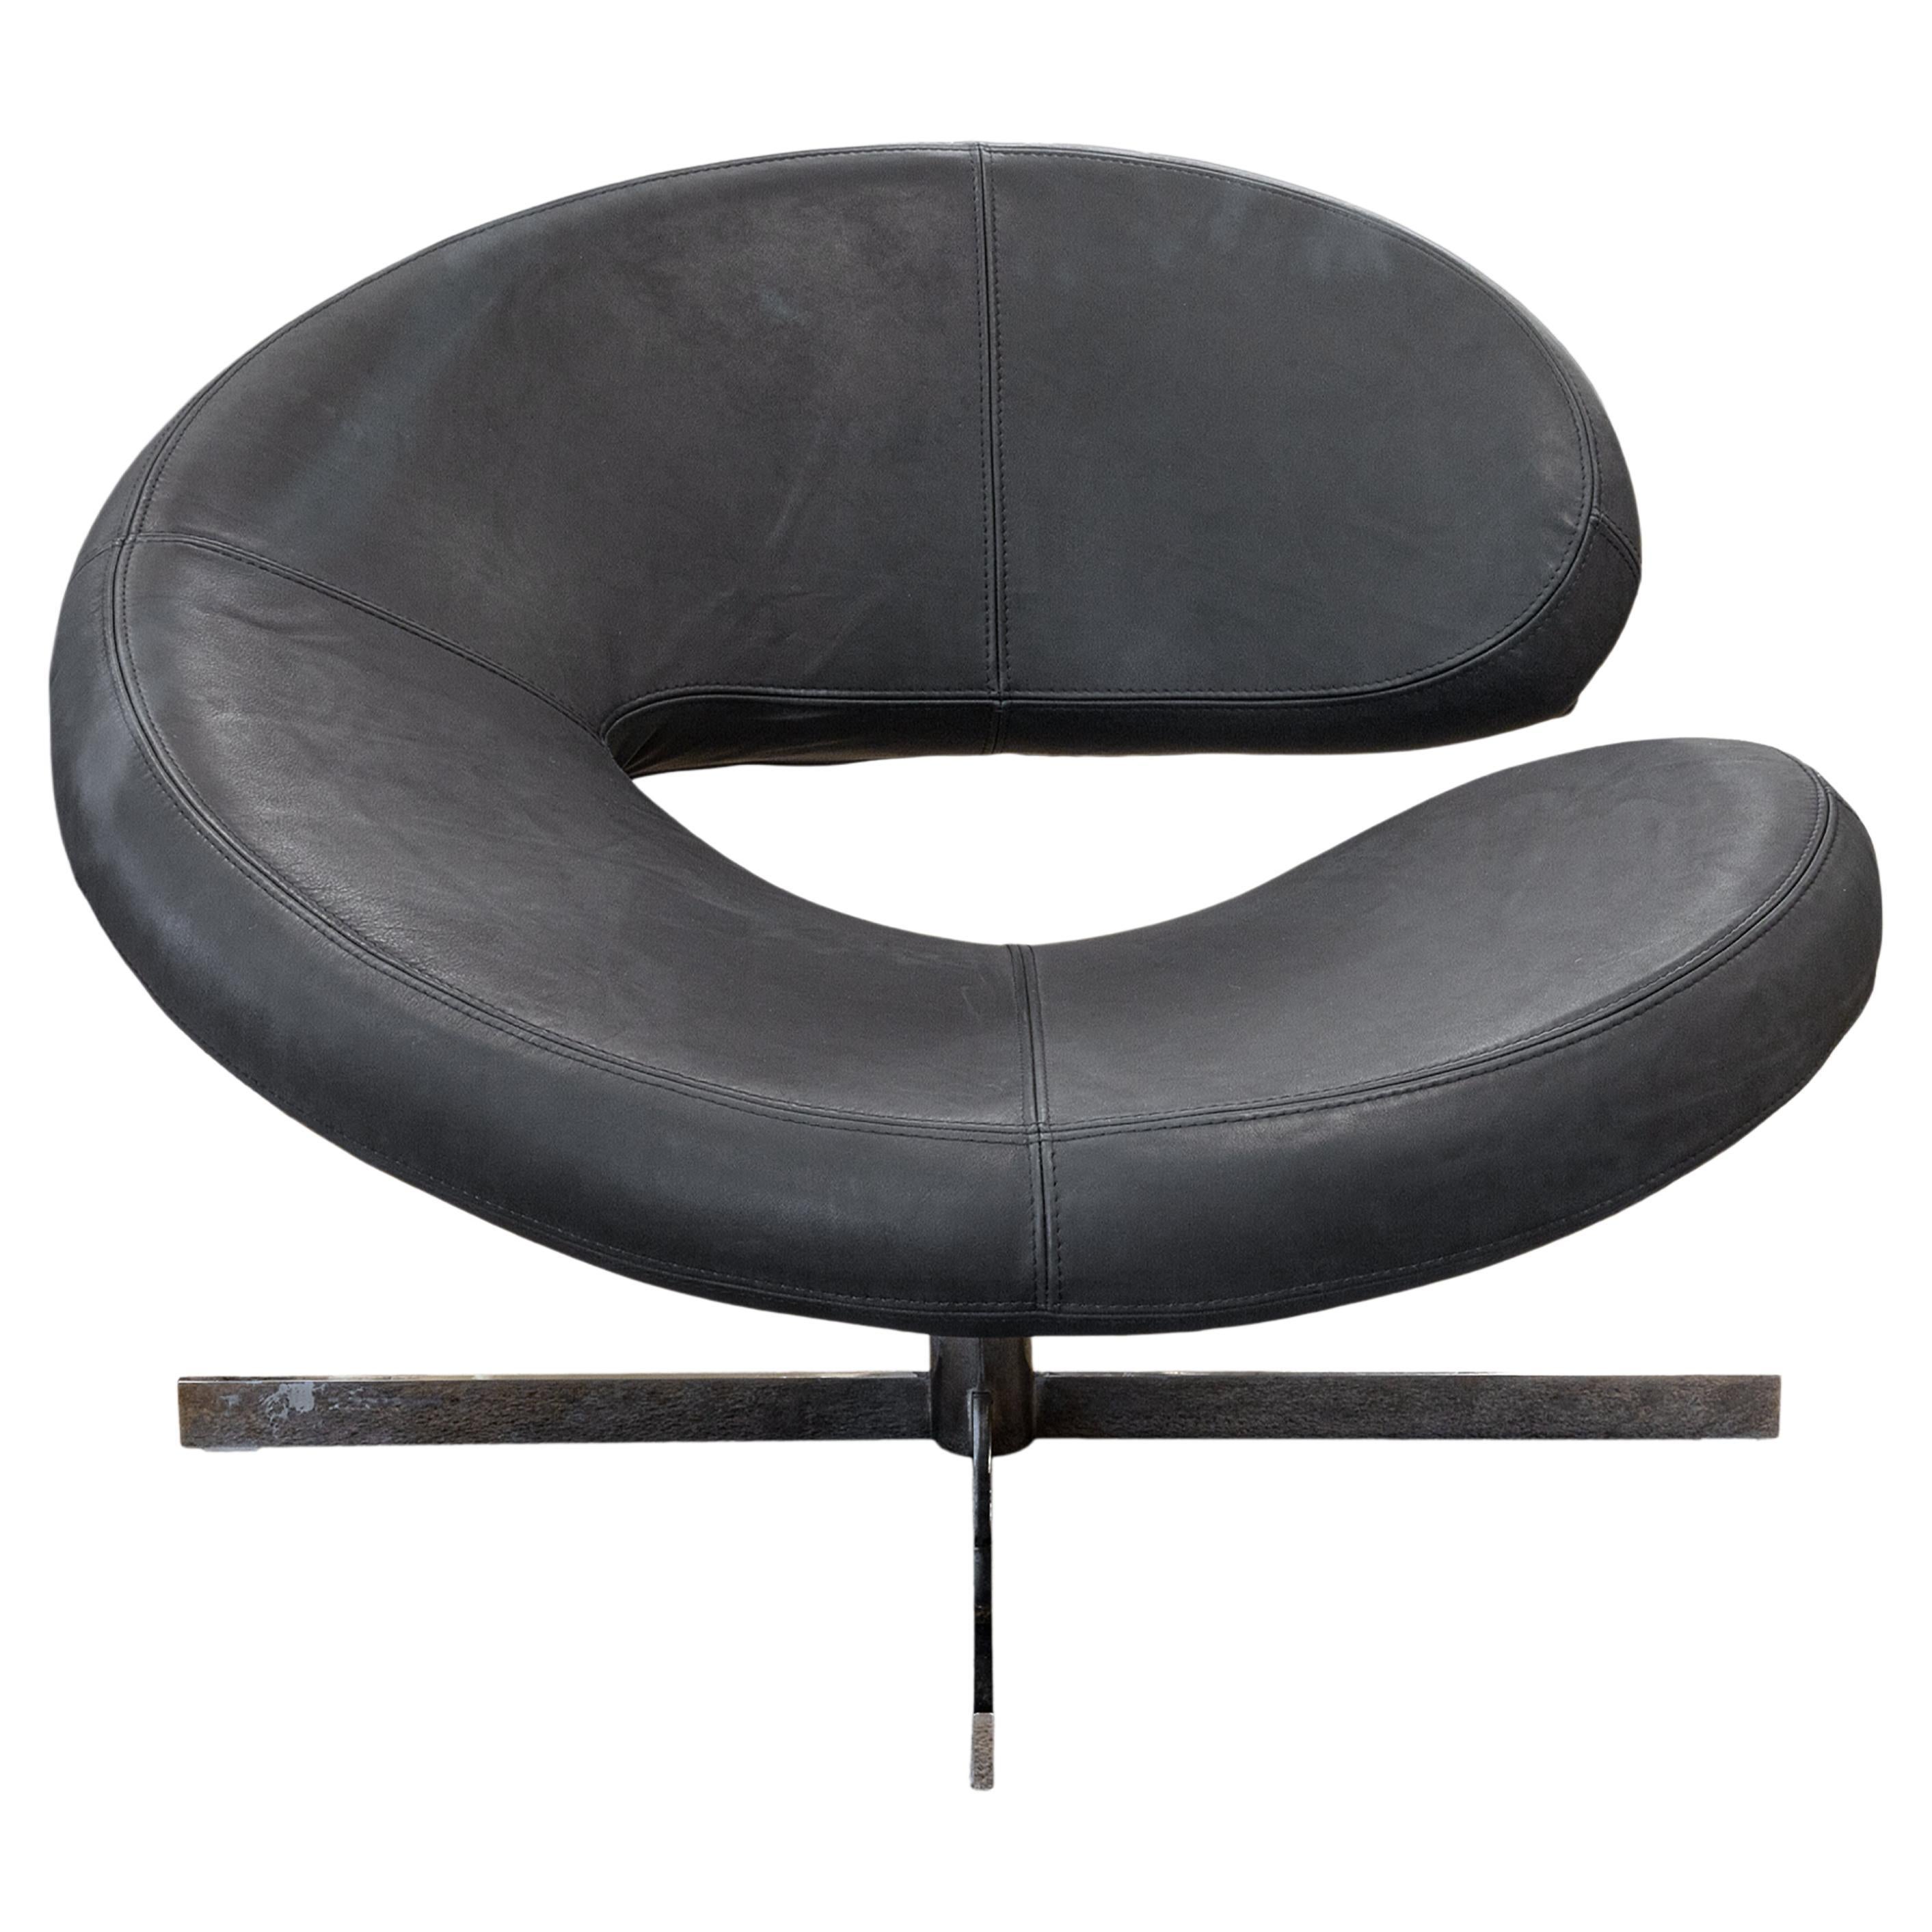 Roche Bobois Nuage 2 by Tapinassi and Manzoni Chrome and Leather Accent Chair